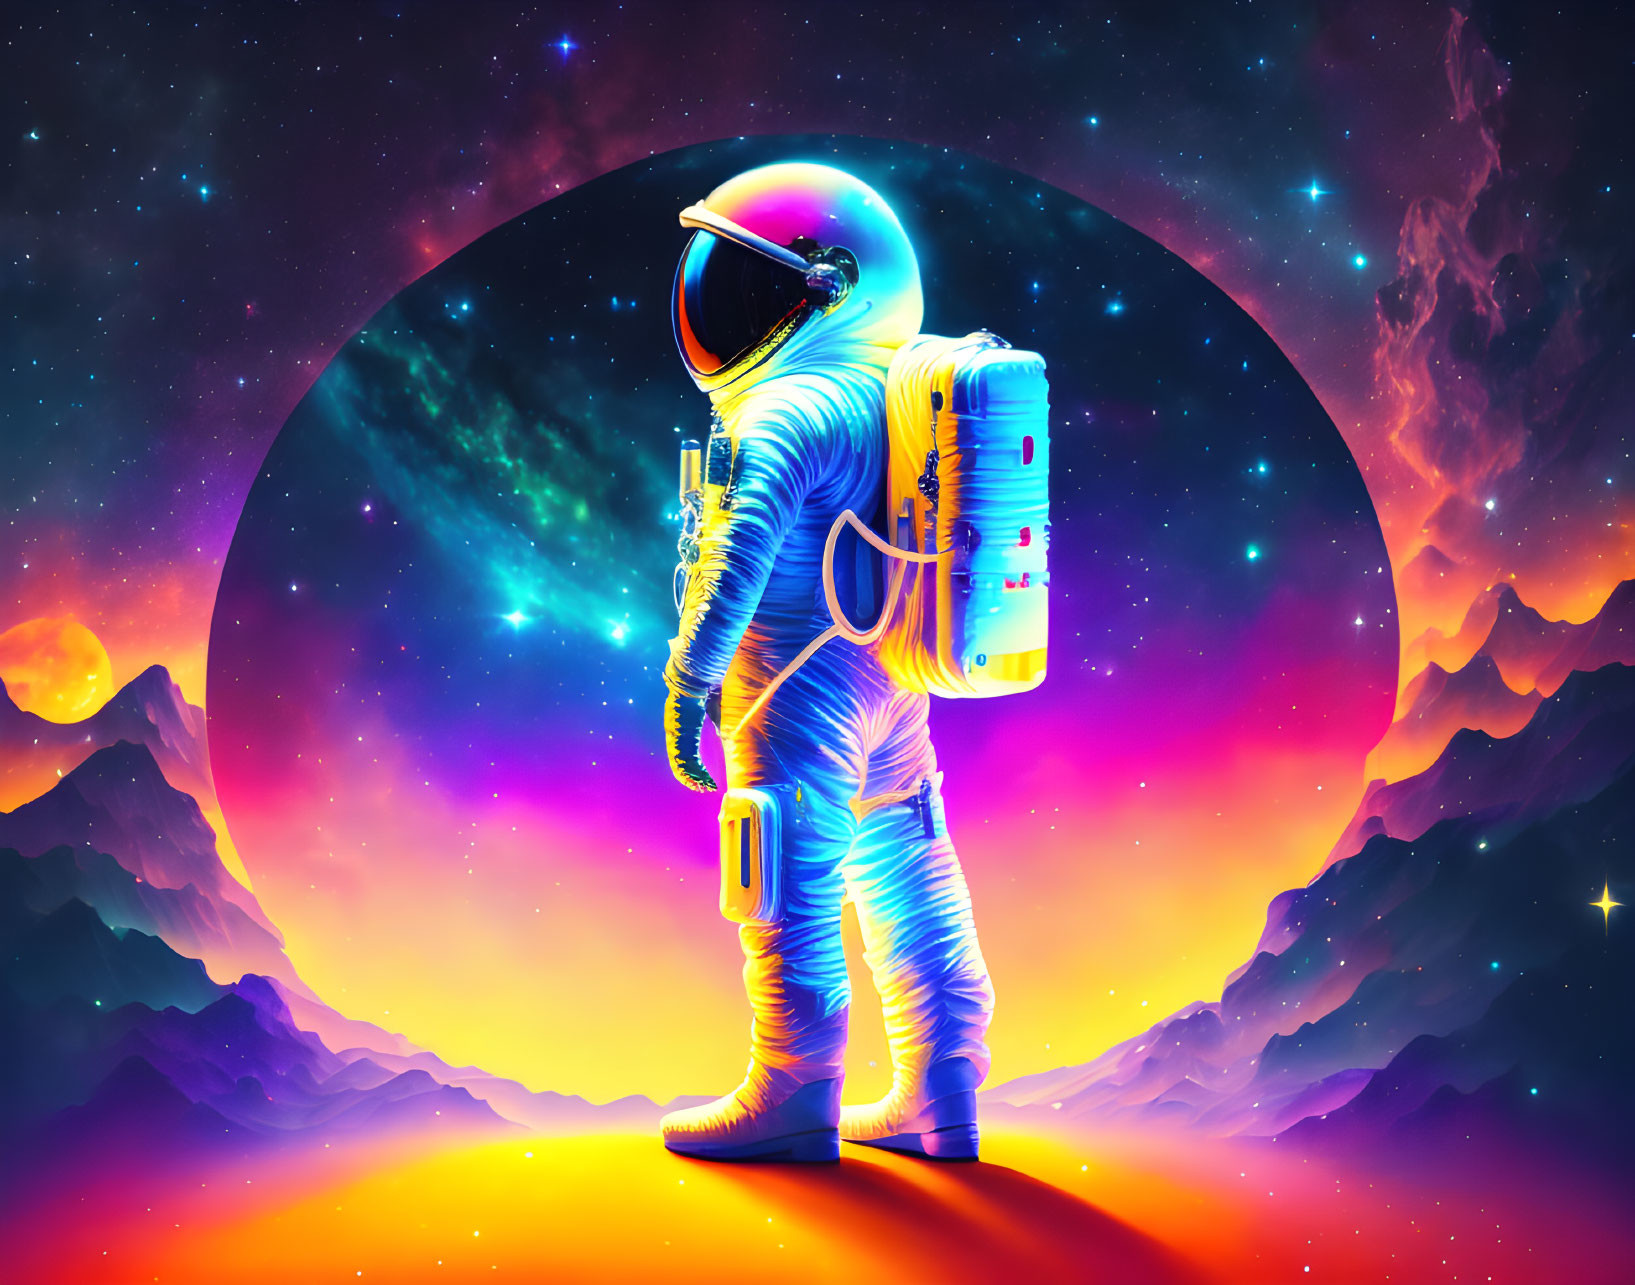 Colorful Astronaut Standing in Cosmic Backdrop